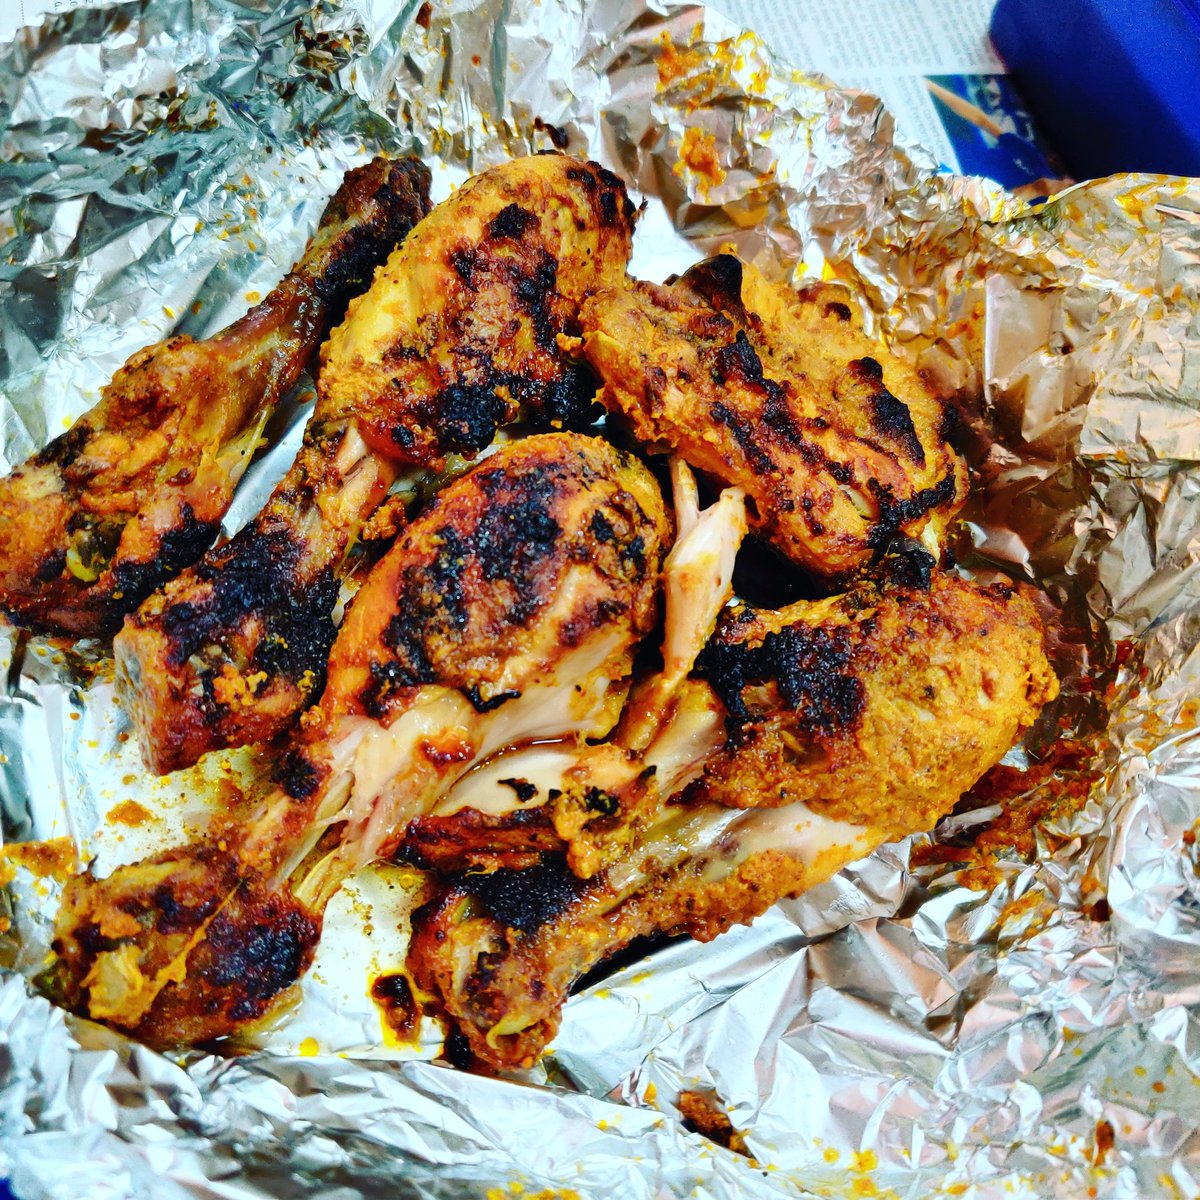 Homemade Tandoori chicken. Scrumptious food 😋 no market restaurant can come close to this.. Ketosis for the win. #keto #ketodiet #ketomeals #ketogenicdiet #DitchTheCarbs #NoToCarbs